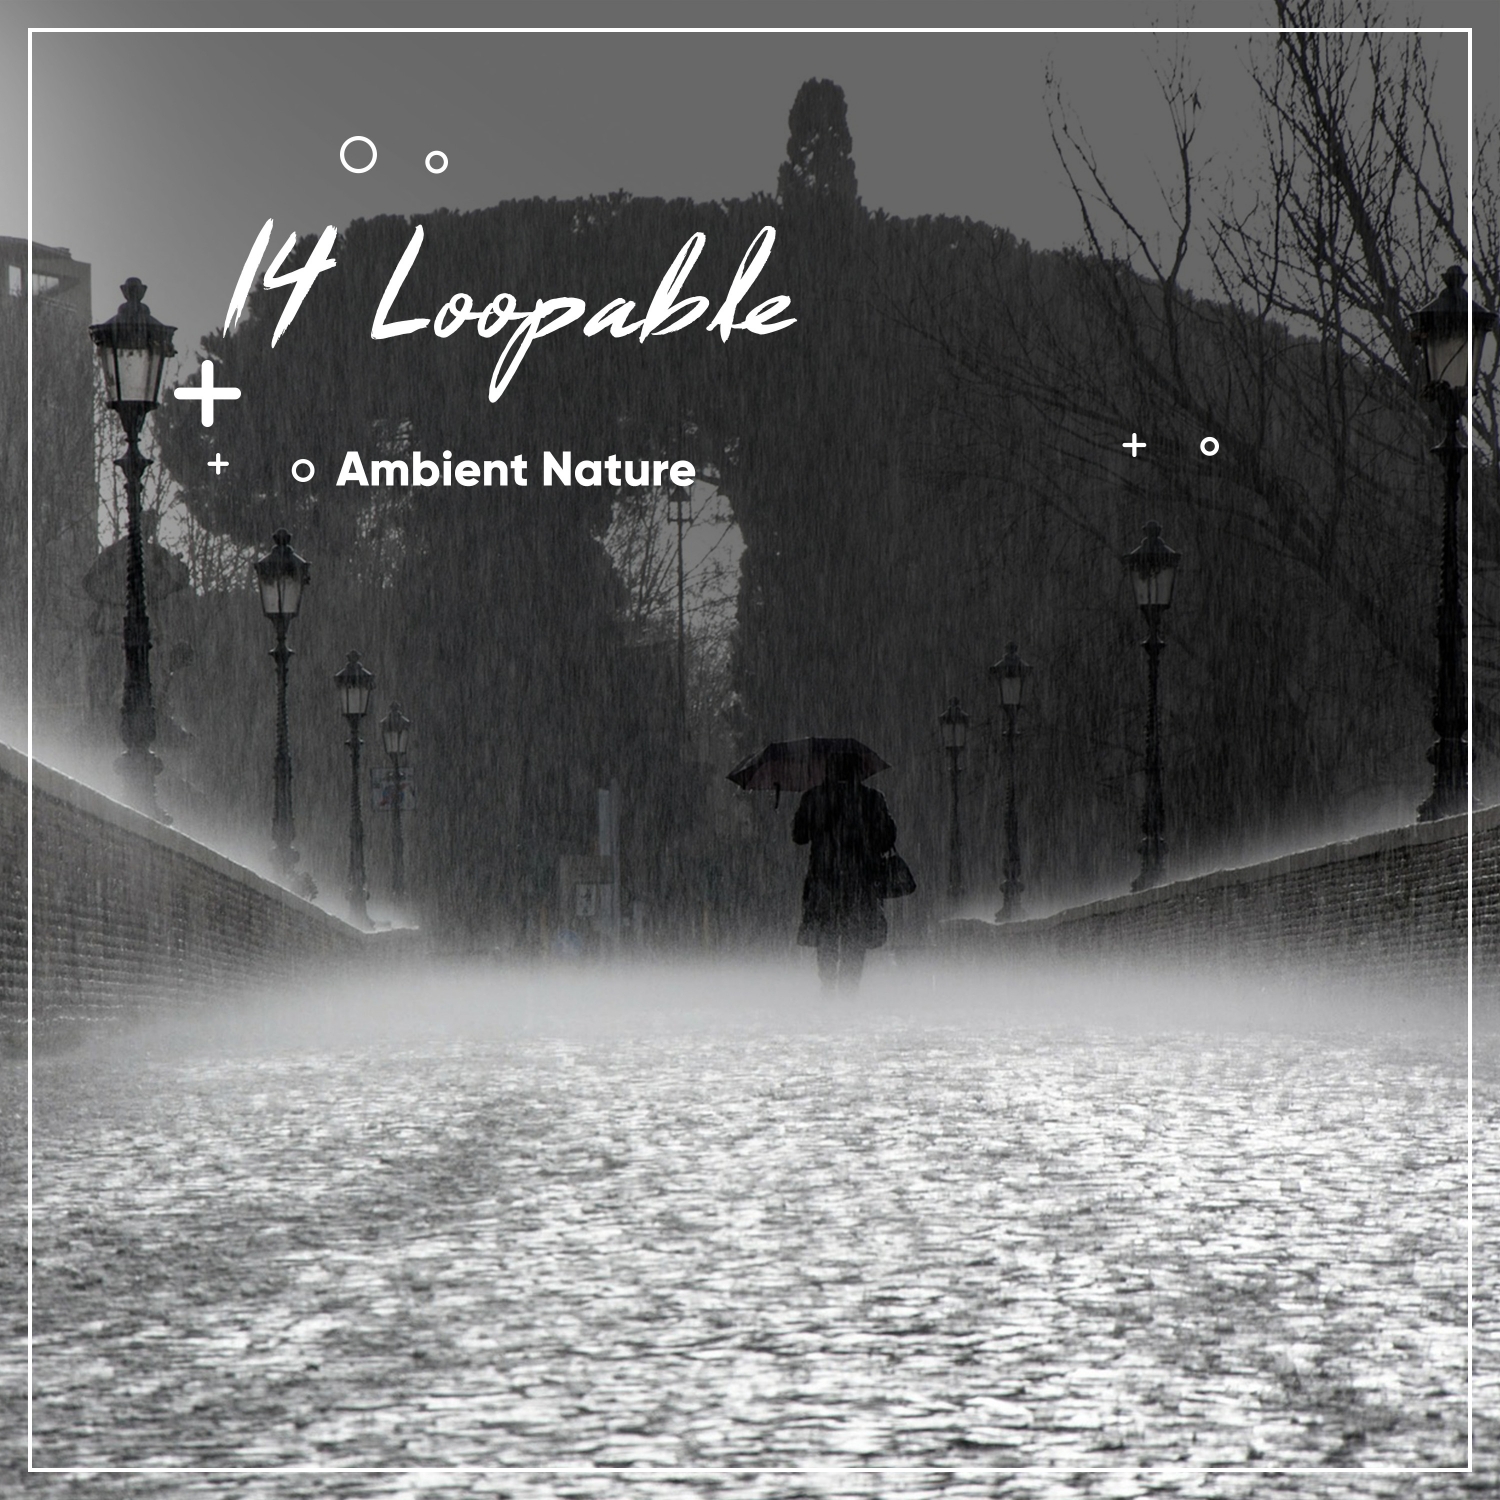 14 Loopable Ambient Nature, Rain and White Noise Sounds